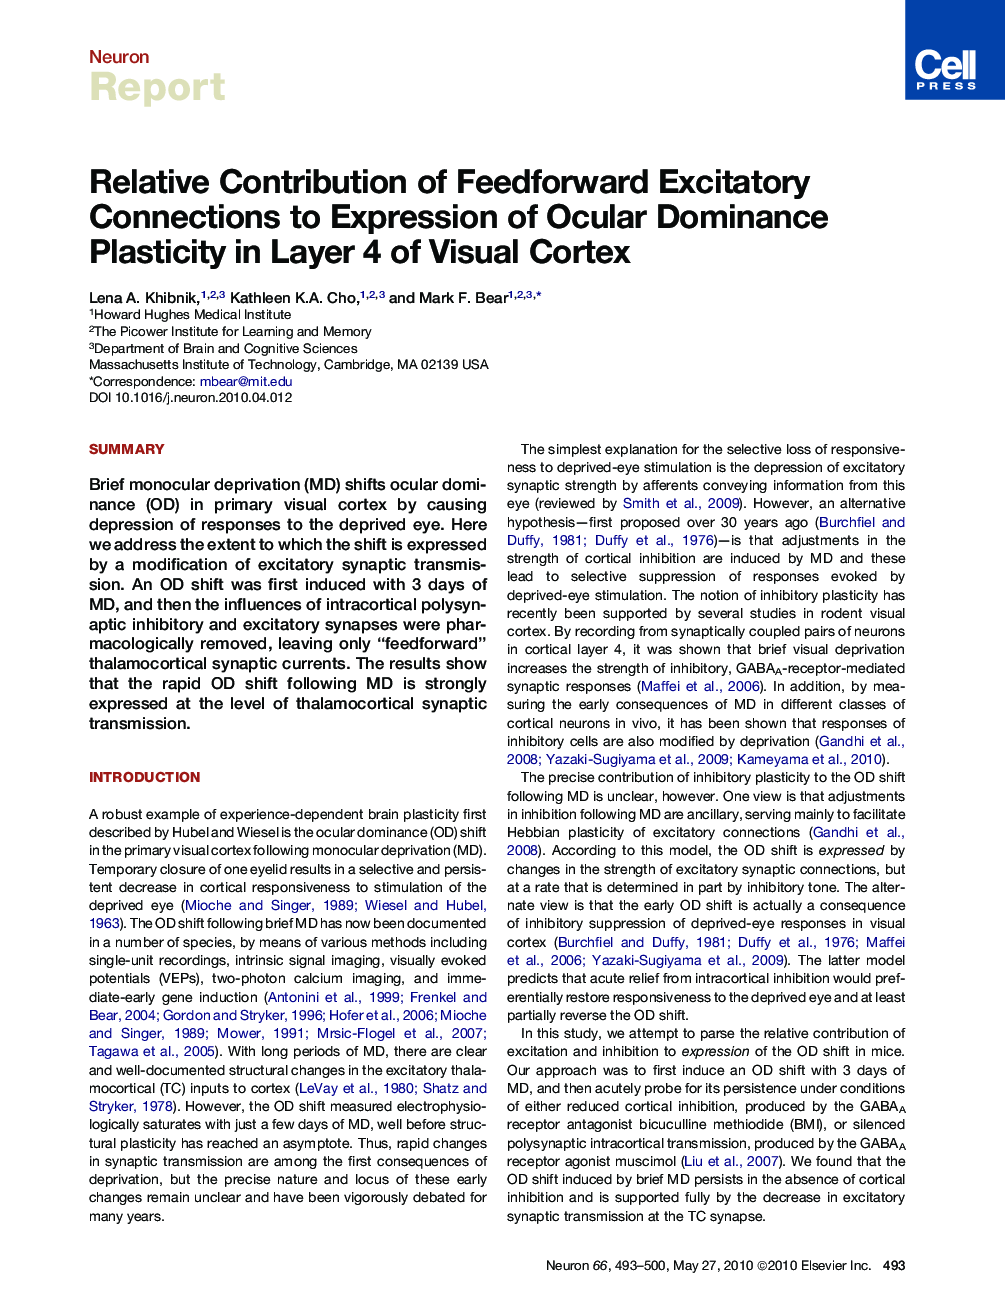 Relative Contribution of Feedforward Excitatory Connections to Expression of Ocular Dominance Plasticity in Layer 4 of Visual Cortex